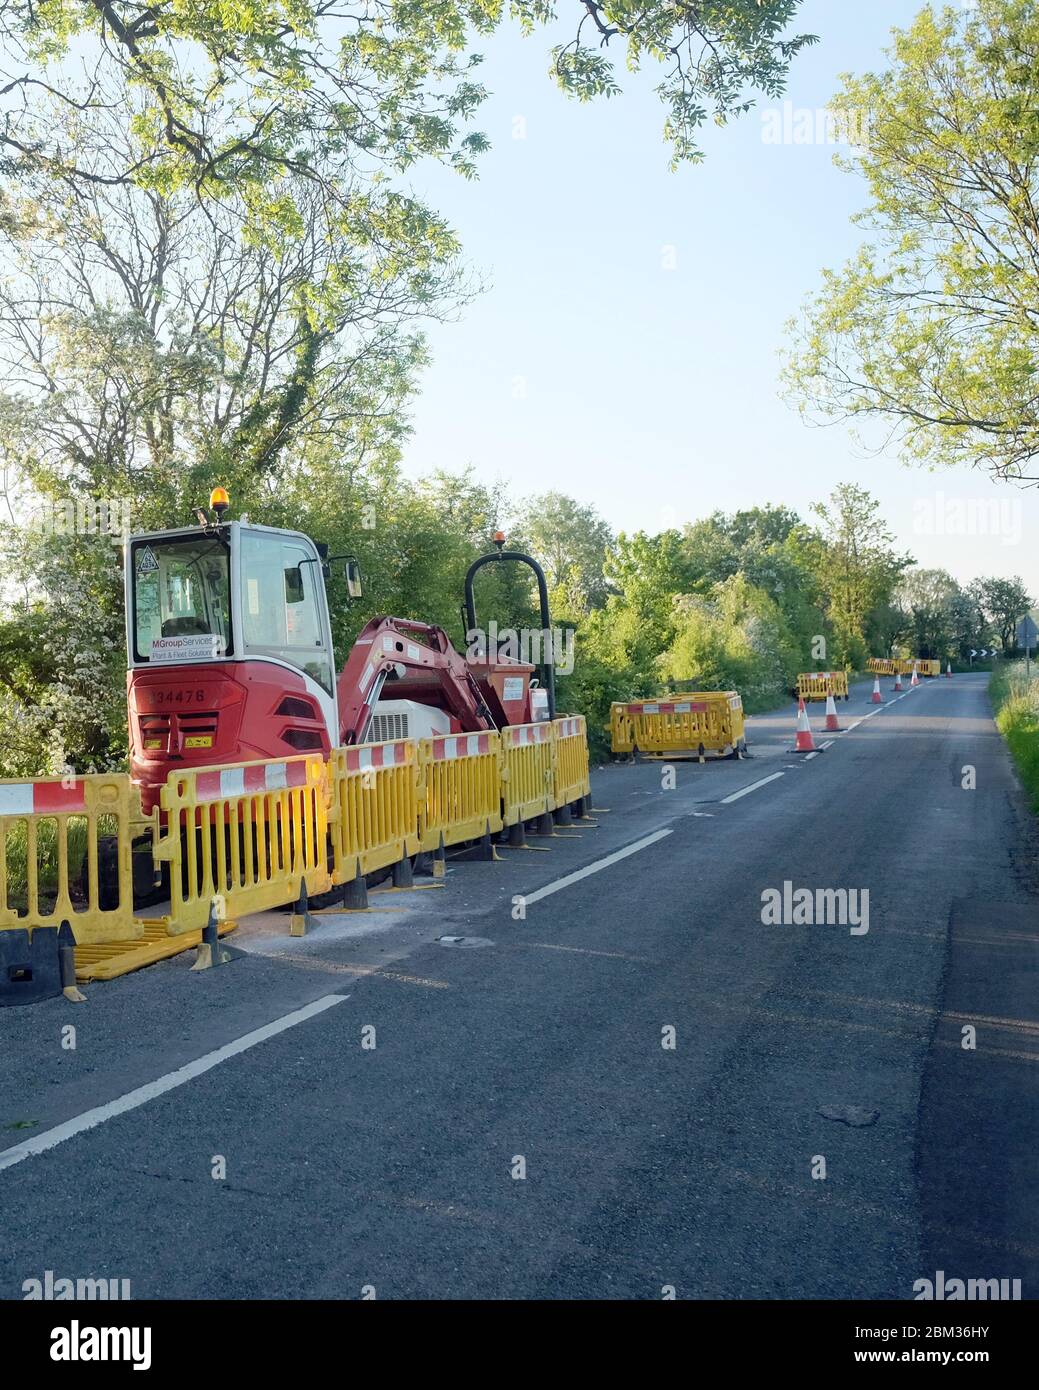 May 2020 - Gas main replacement work on a country road B3161 just South of Cheddar, in Somerset, UK Stock Photo